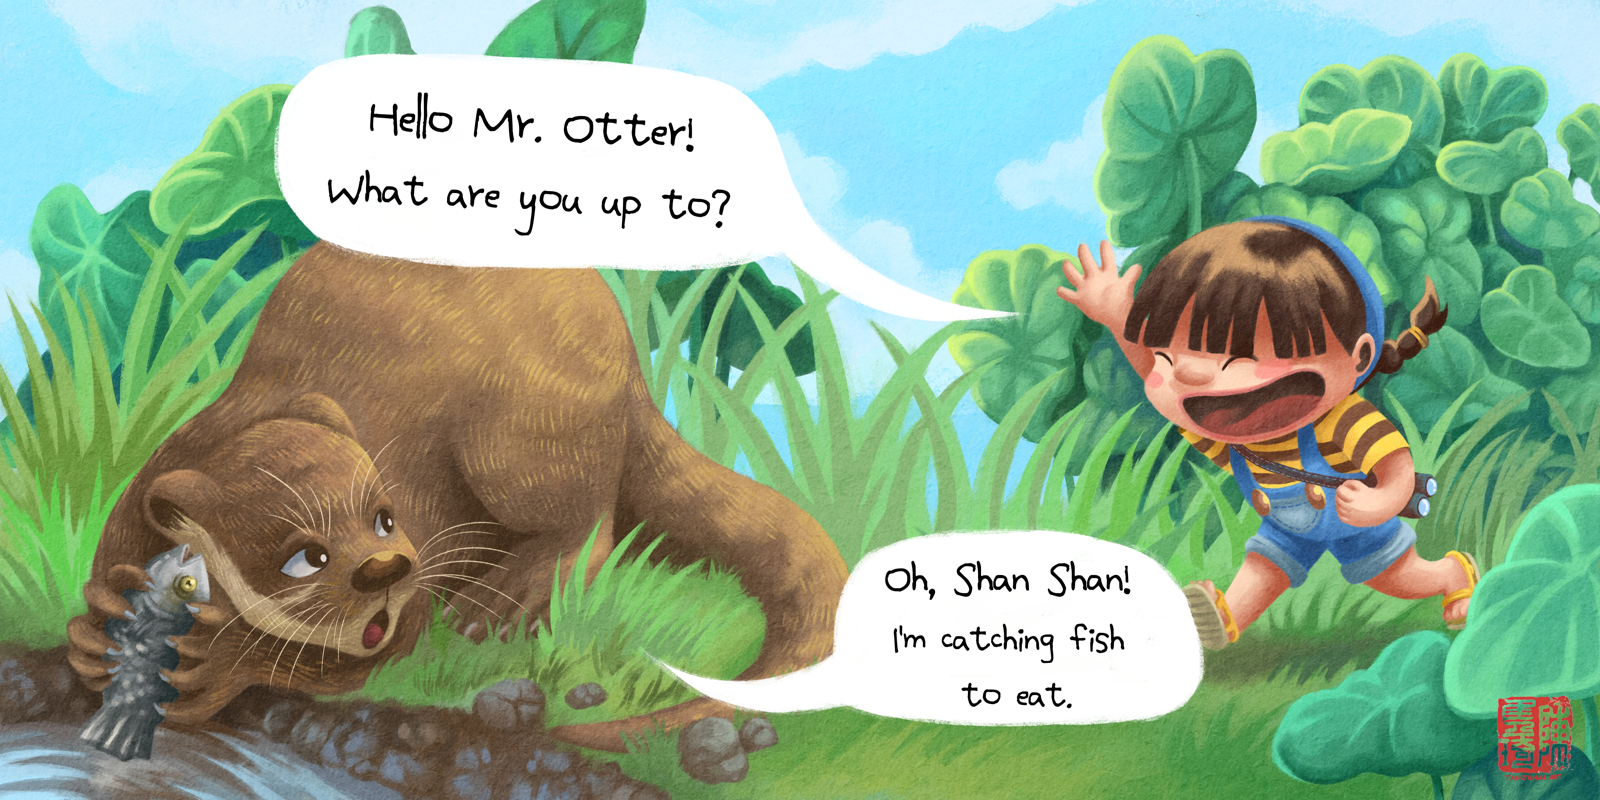 A two-page spread from 'Shan Shan and Mr. Otter' (english version), showing Shan Shan running towards Mr. Otter and greeting him in a park full of lush vegetation. Mr. Otter is holding a fish and squatting next to a river.